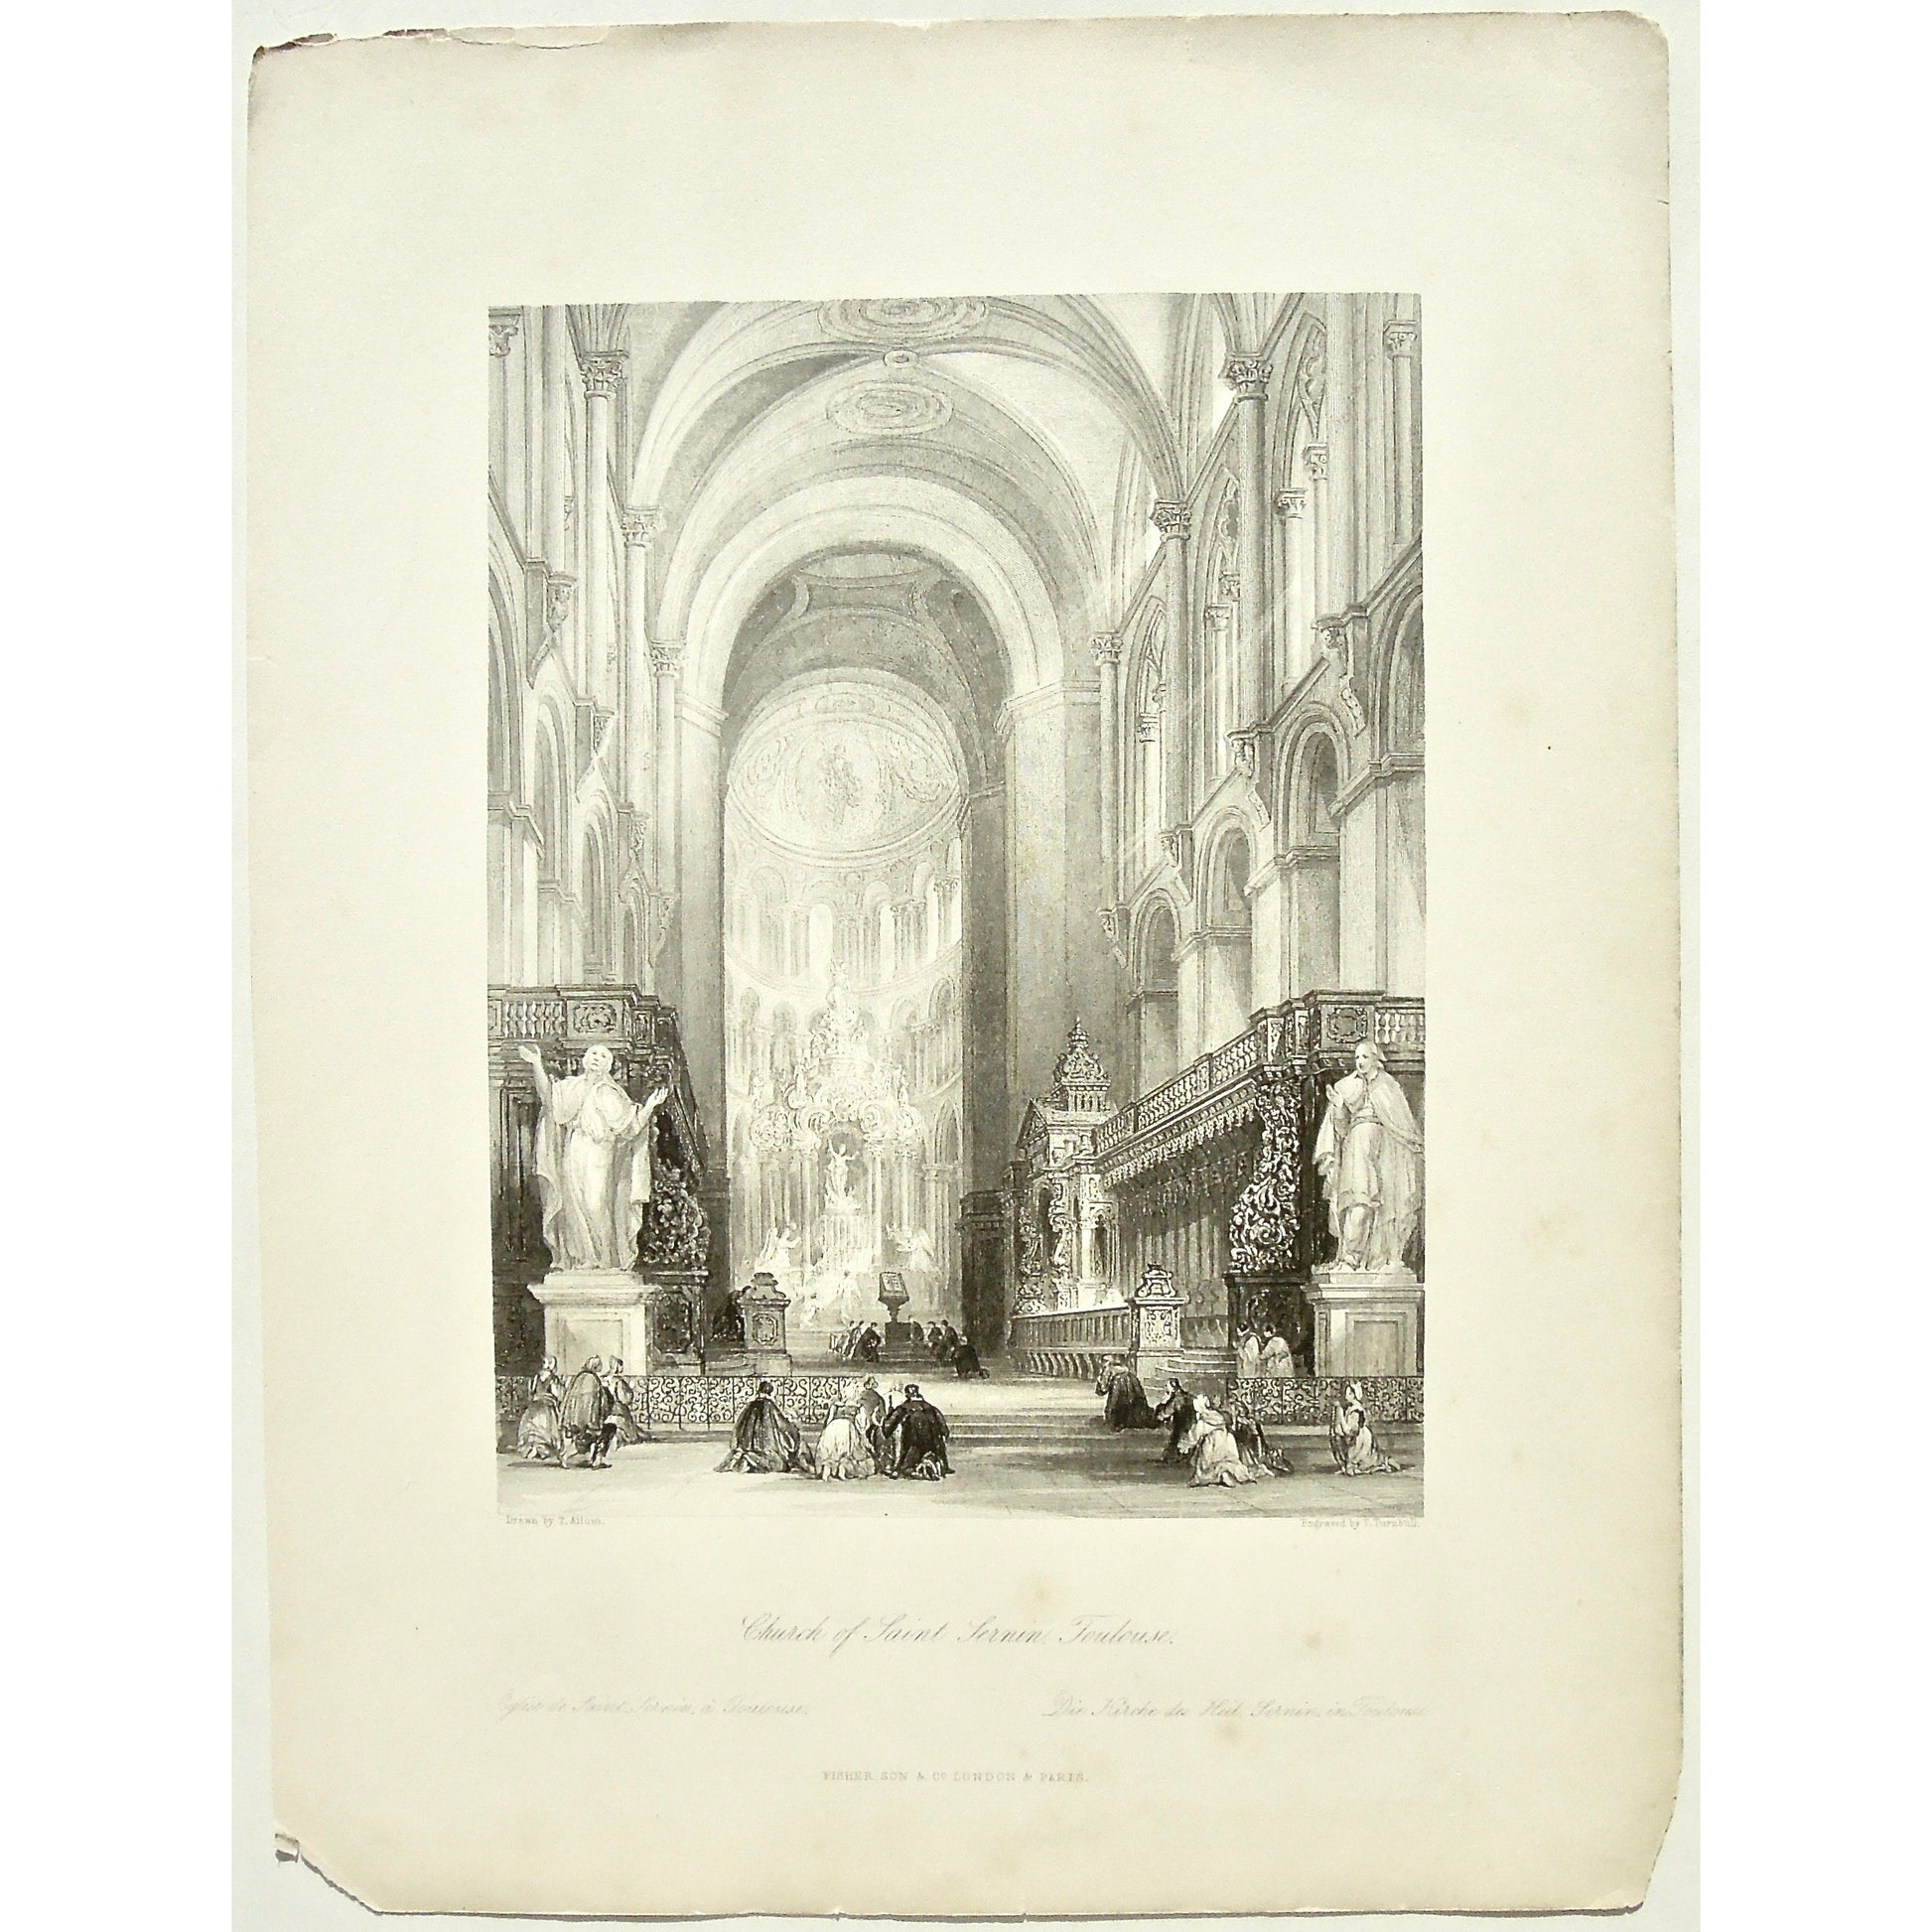 Church of St. Sernin, Church, St. Sernin, Toulouse, Eglise, Kirche, Kirche des Heil Sernin, Altar, Nave, Architecture, Architectural Features, Rib Vaulting, Ribbed Vaulting, Statues, Worship, Worshipers, Worshiping, Pray, Prayer, Praying, Kneeling, On bended knee, Gallery, Dome, Churches, Buildings, interiors, interior, France, France Illustrated, France Illustrated, Exhibiting its Landscape Scenery, Antiquities, Military and Ecclesiastical Architecture, Thomas Allom, Allom, Fisher, Son & Co., London, Paris